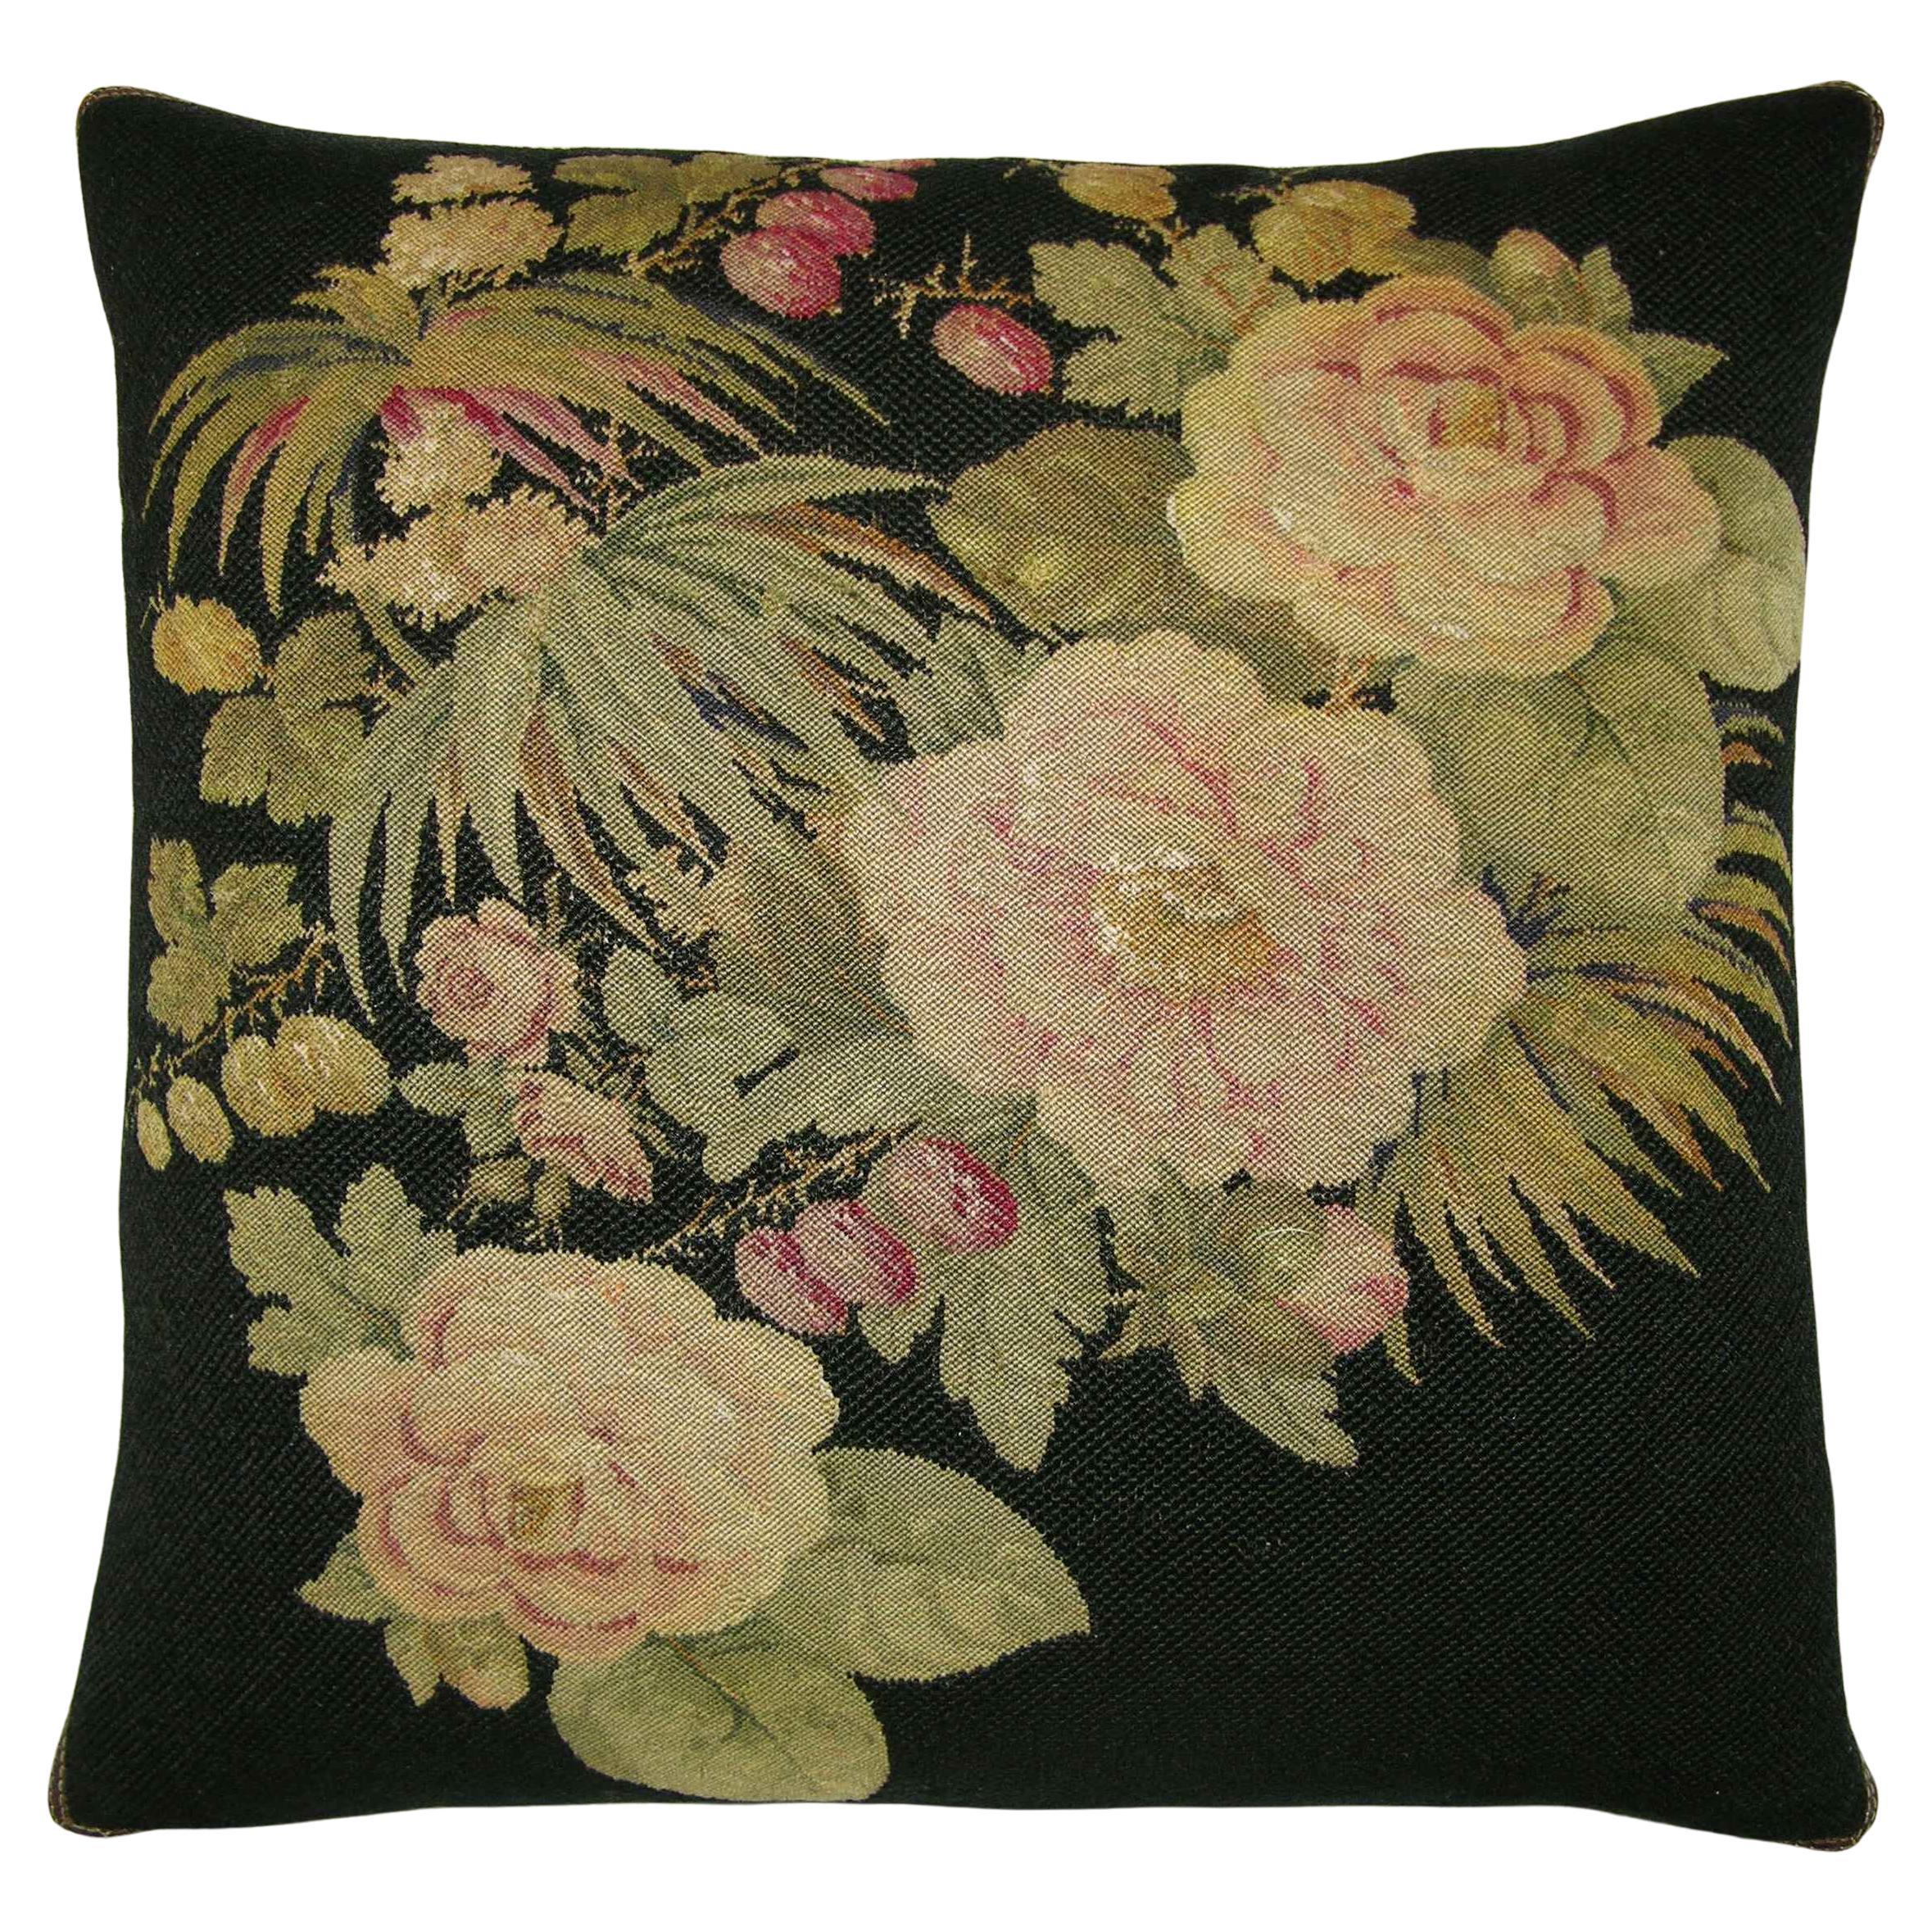 1880 Antique French Needlepoint Pillow - 19 X 18